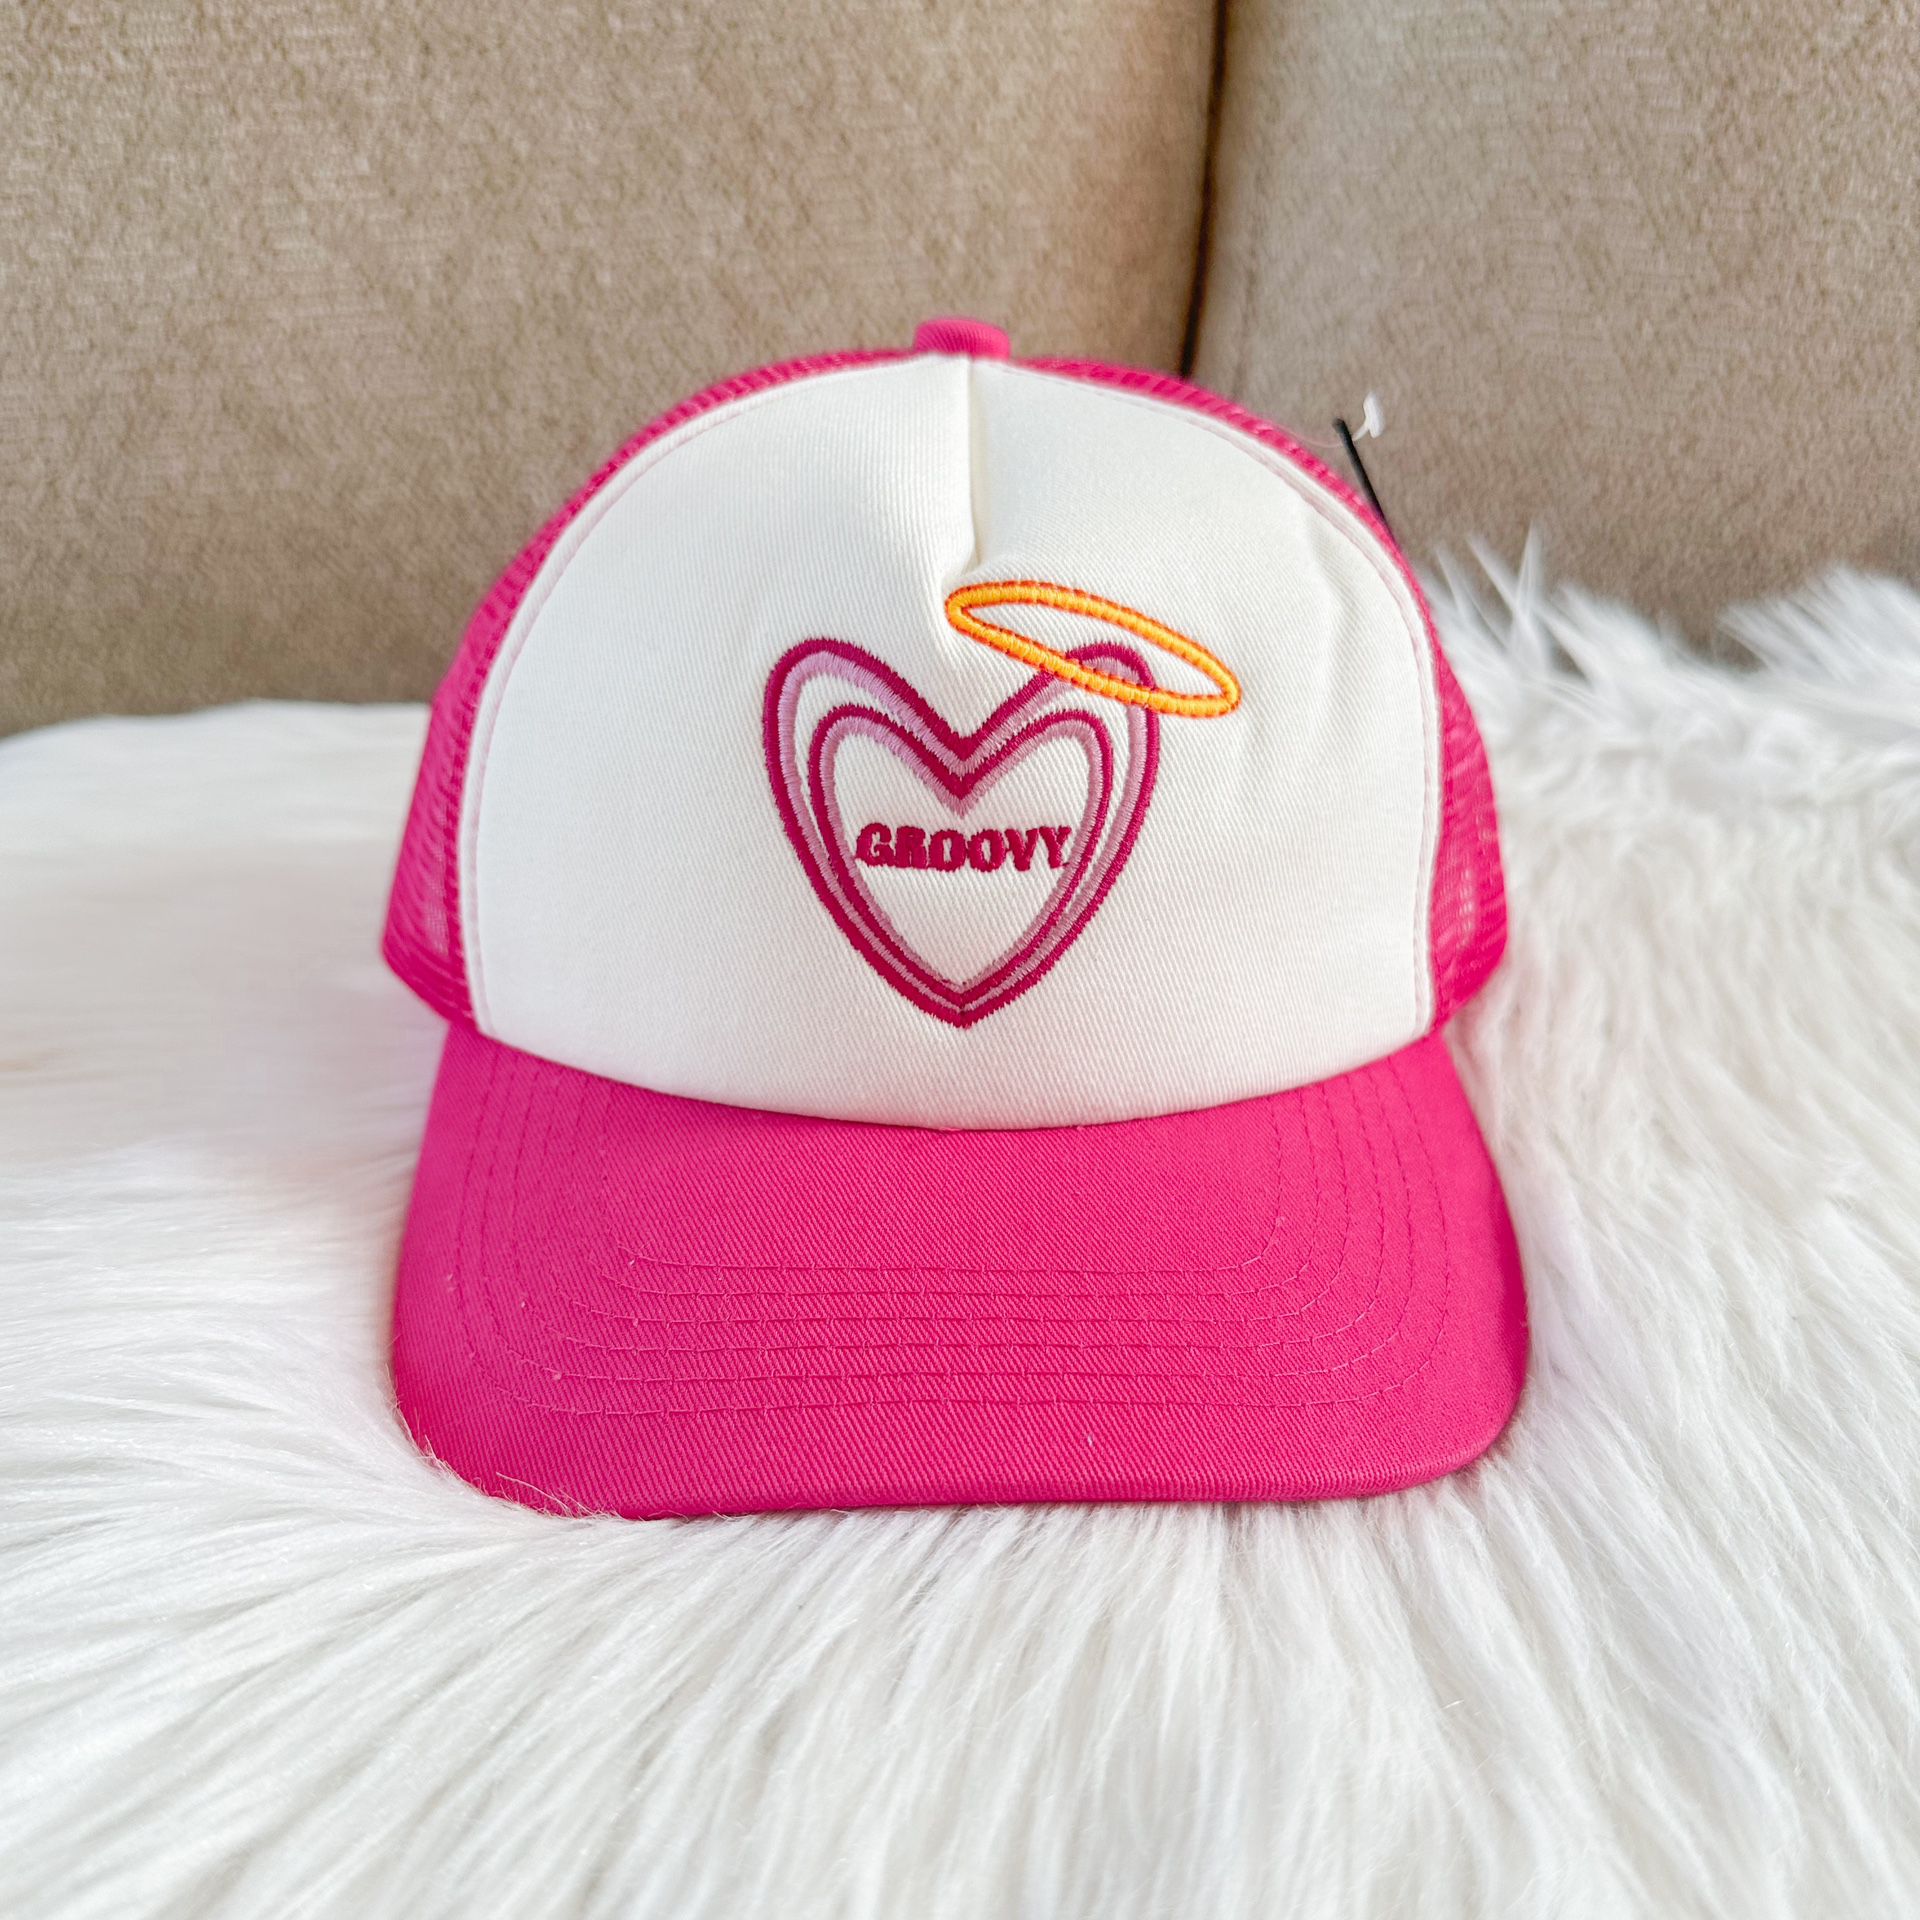 Pink trucker hat, brand new without tag